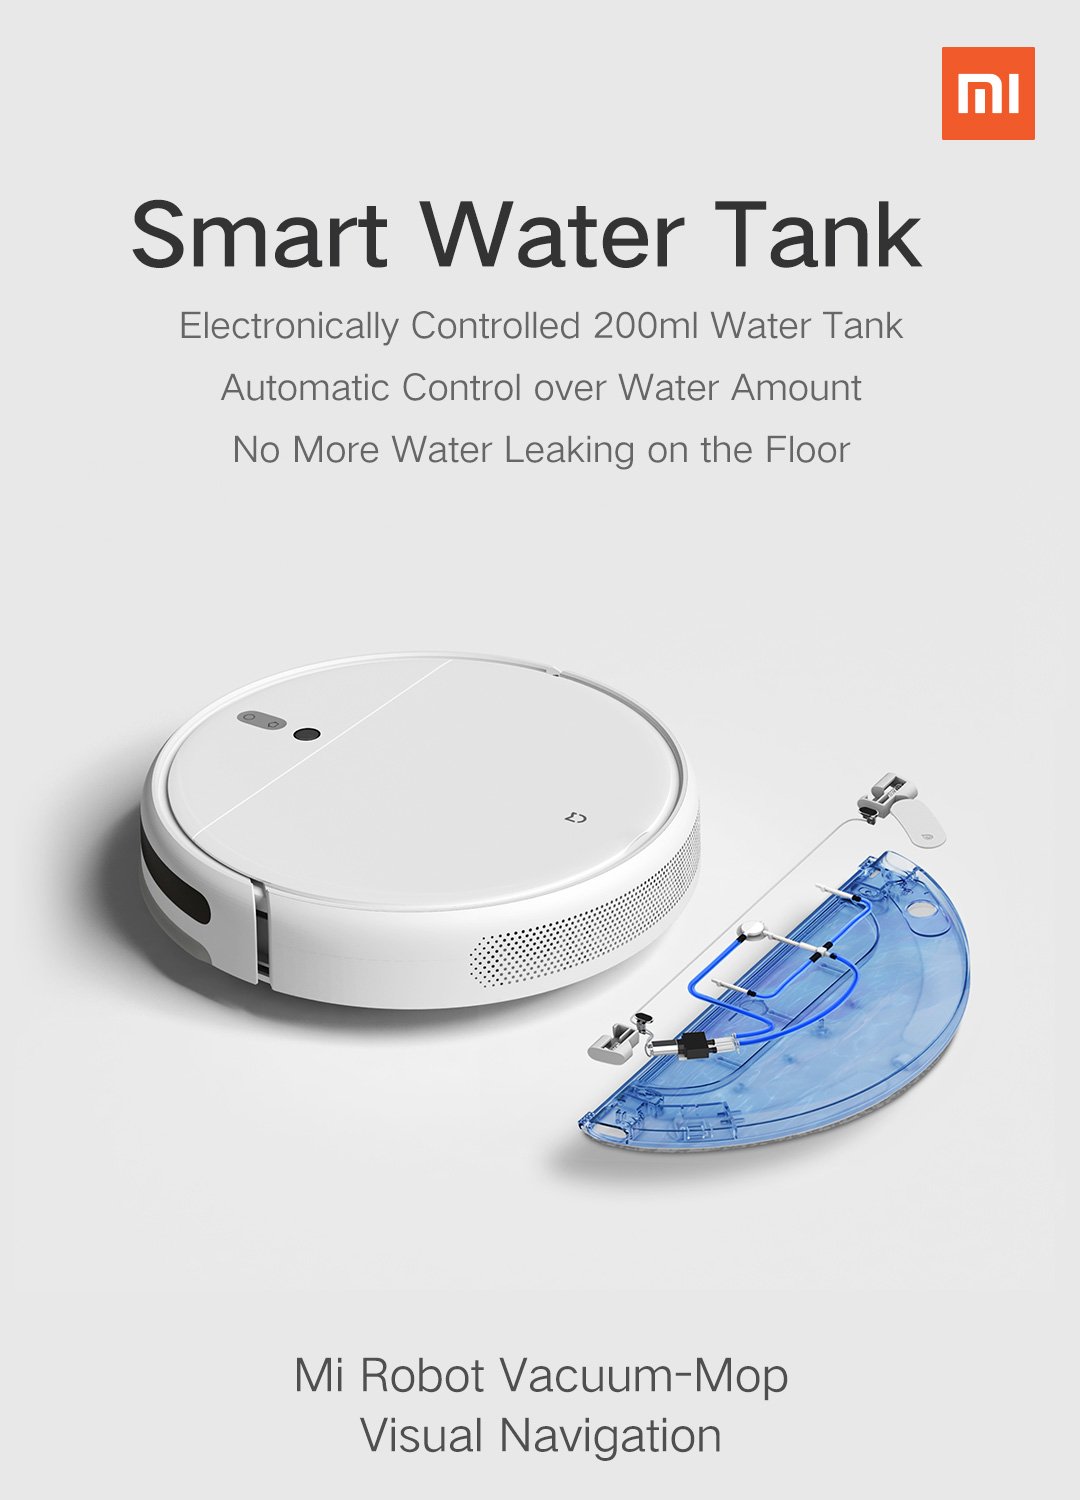 4 Xiaomi &Lt;Div Id=&Quot;Product-Description-Short-979&Quot; Class=&Quot;Product-Description-Short&Quot;&Gt; Unique Robotic Vacuum Cleaner For A Great Price, Wet And Dry Cleaning, Wi-Fi Connection, Vslam Route Planning, Suction Power Up To 2500 Pa, Application Control, Hepa Filter And Much More. Https://Youtu.be/Ychdmp-Pa7O &Lt;/Div&Gt;